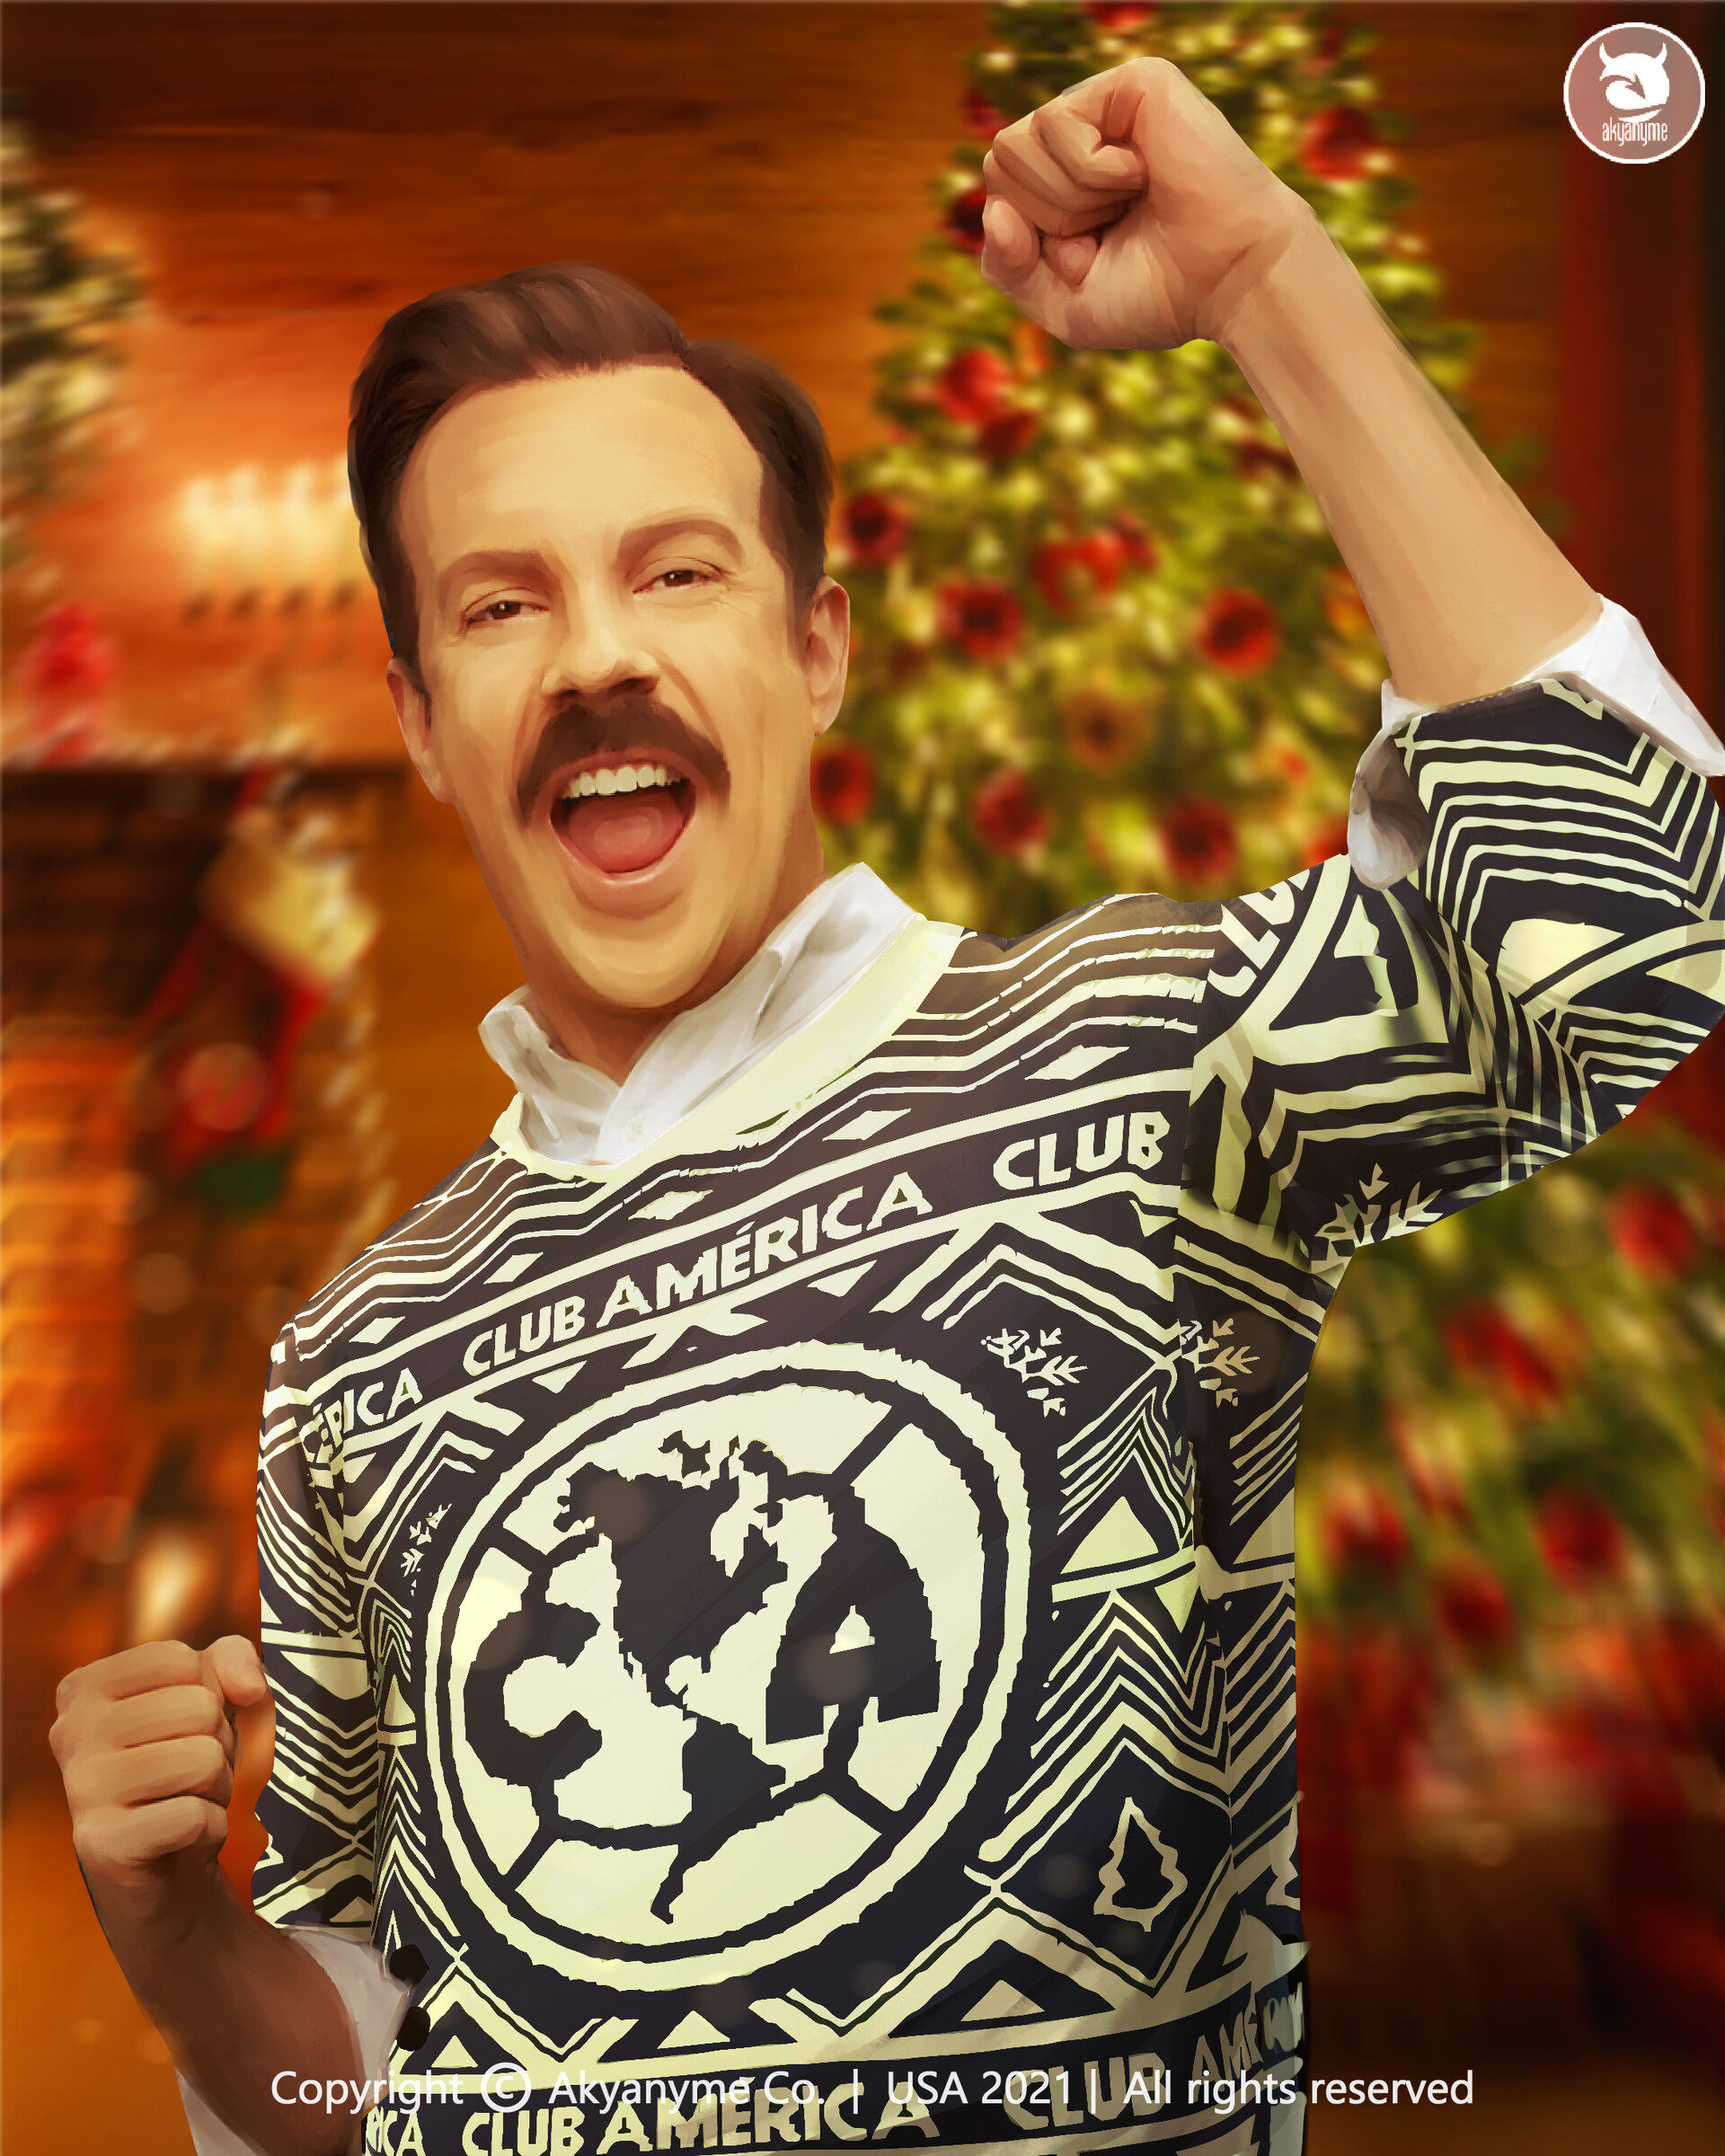 ArtStation - Ted Lasso Ugly Sweater Club America